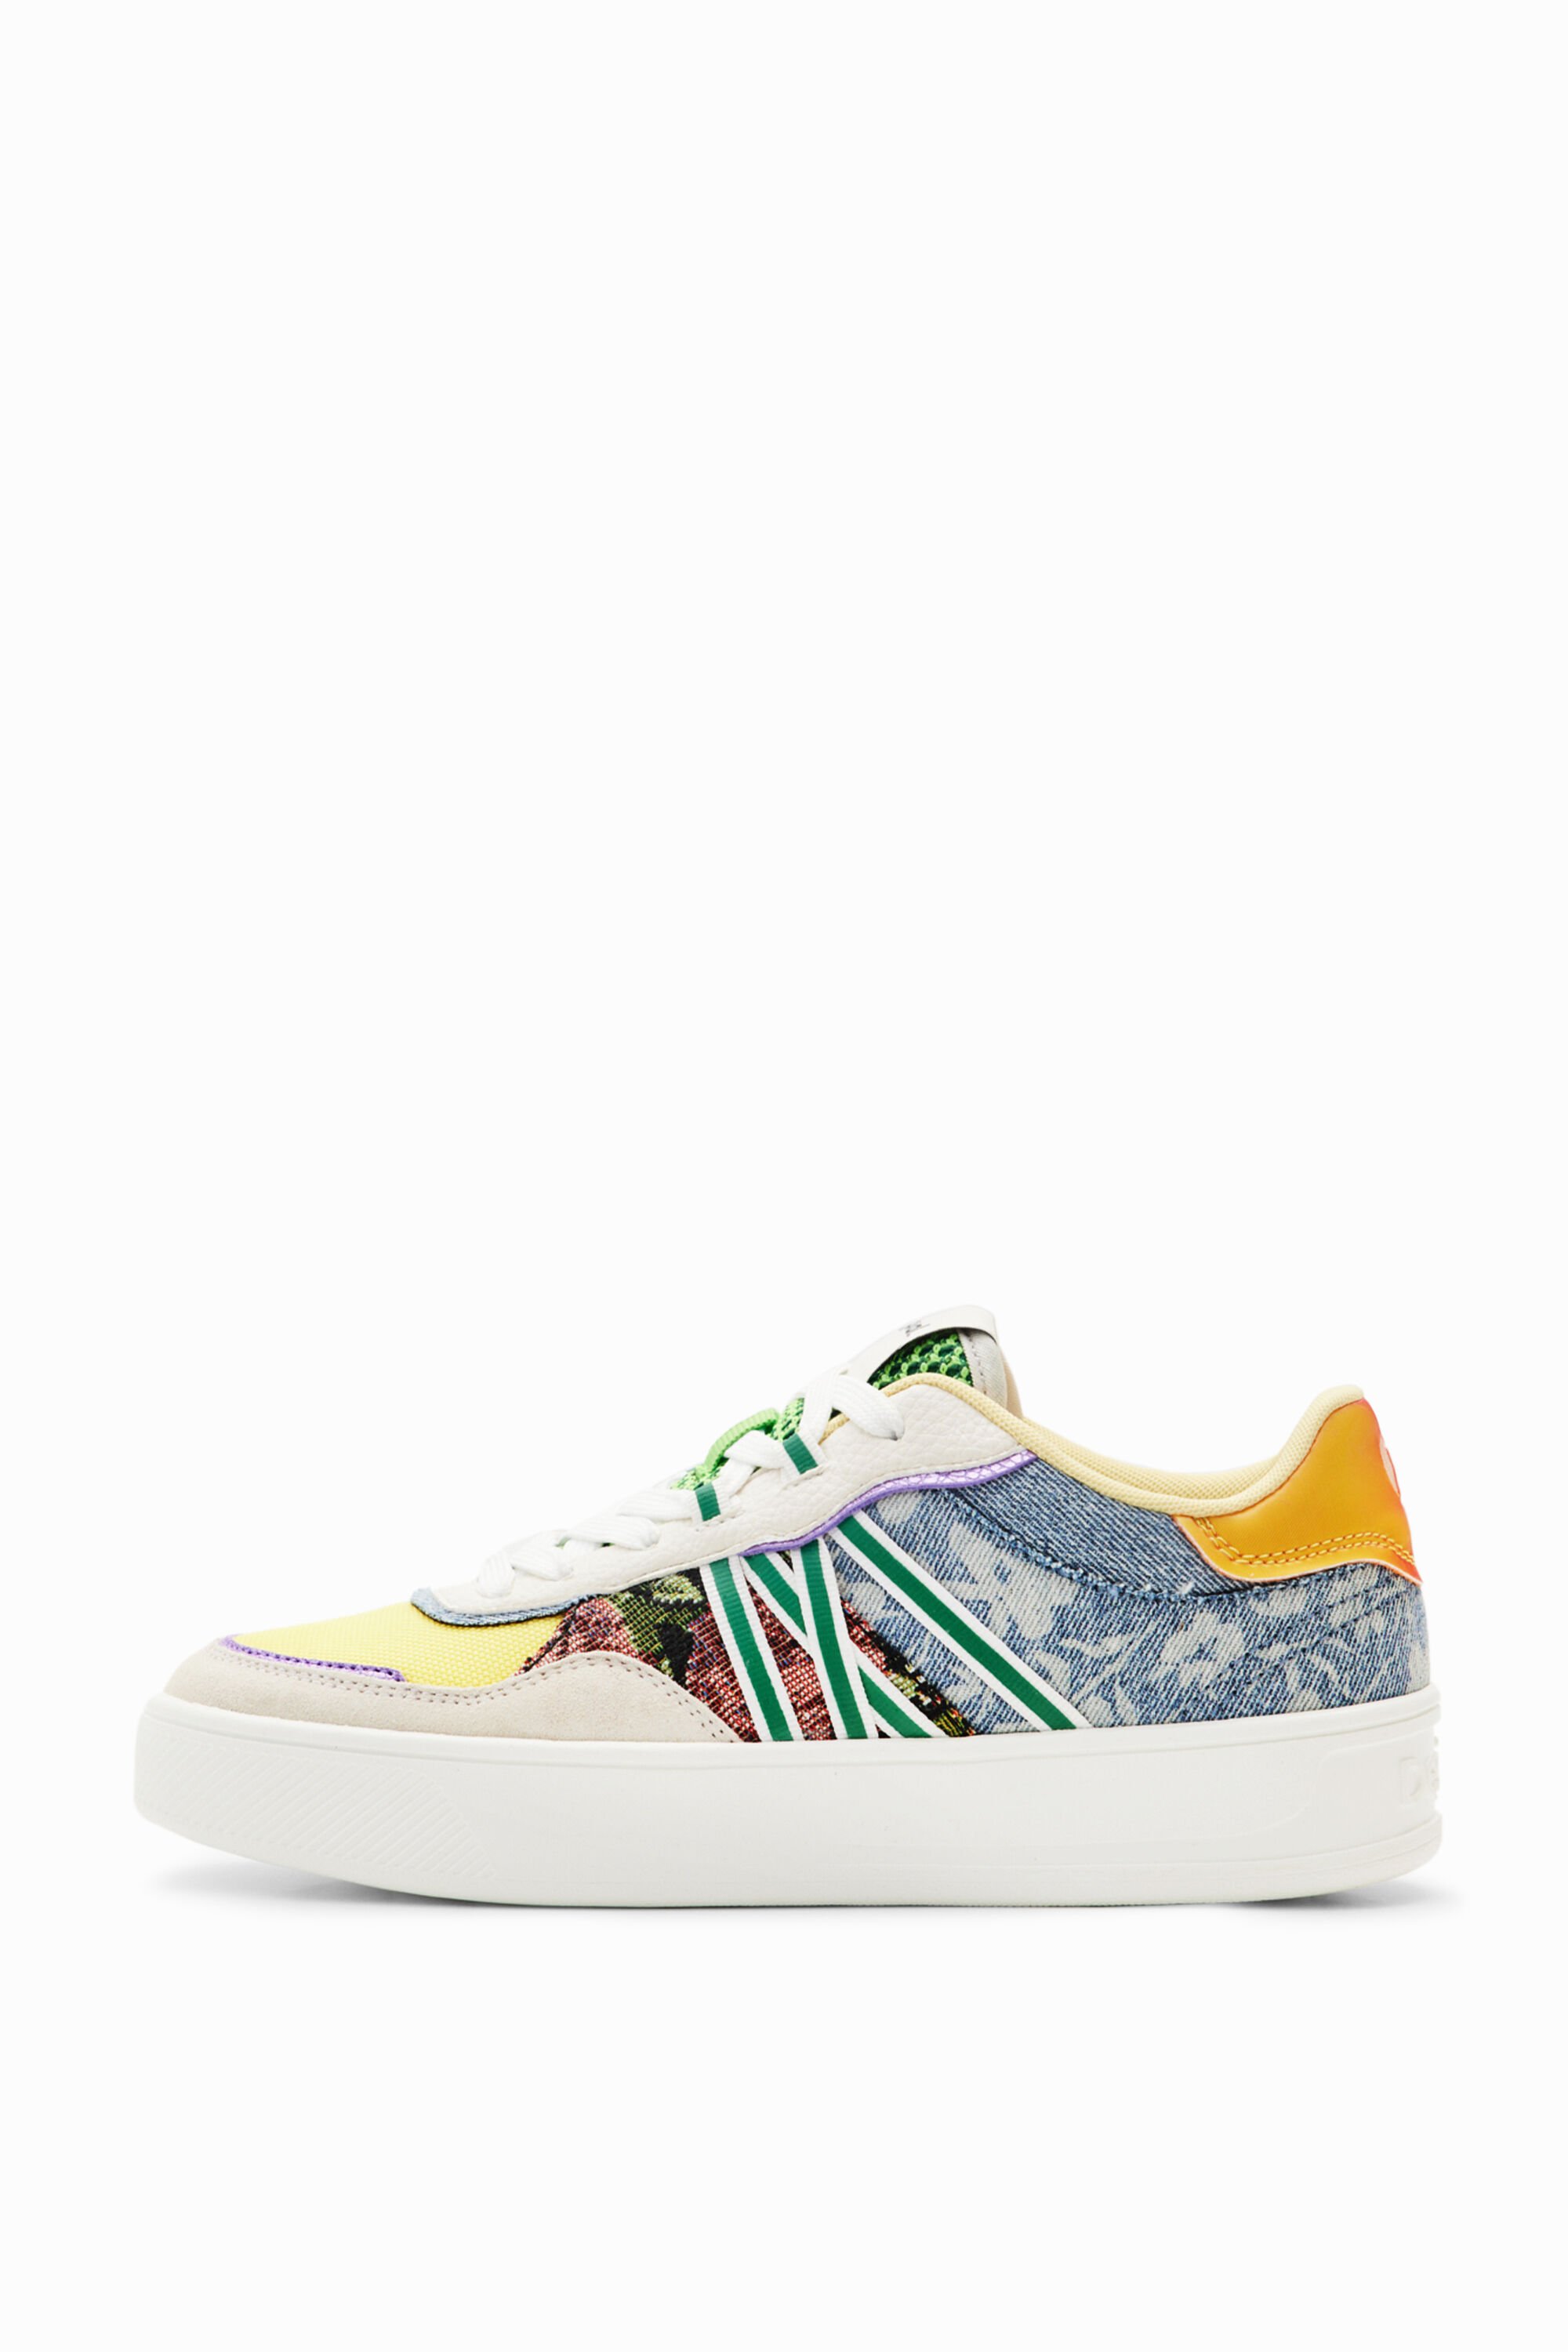 Desigual Patchwork Platform Sneakers In Material Finishes